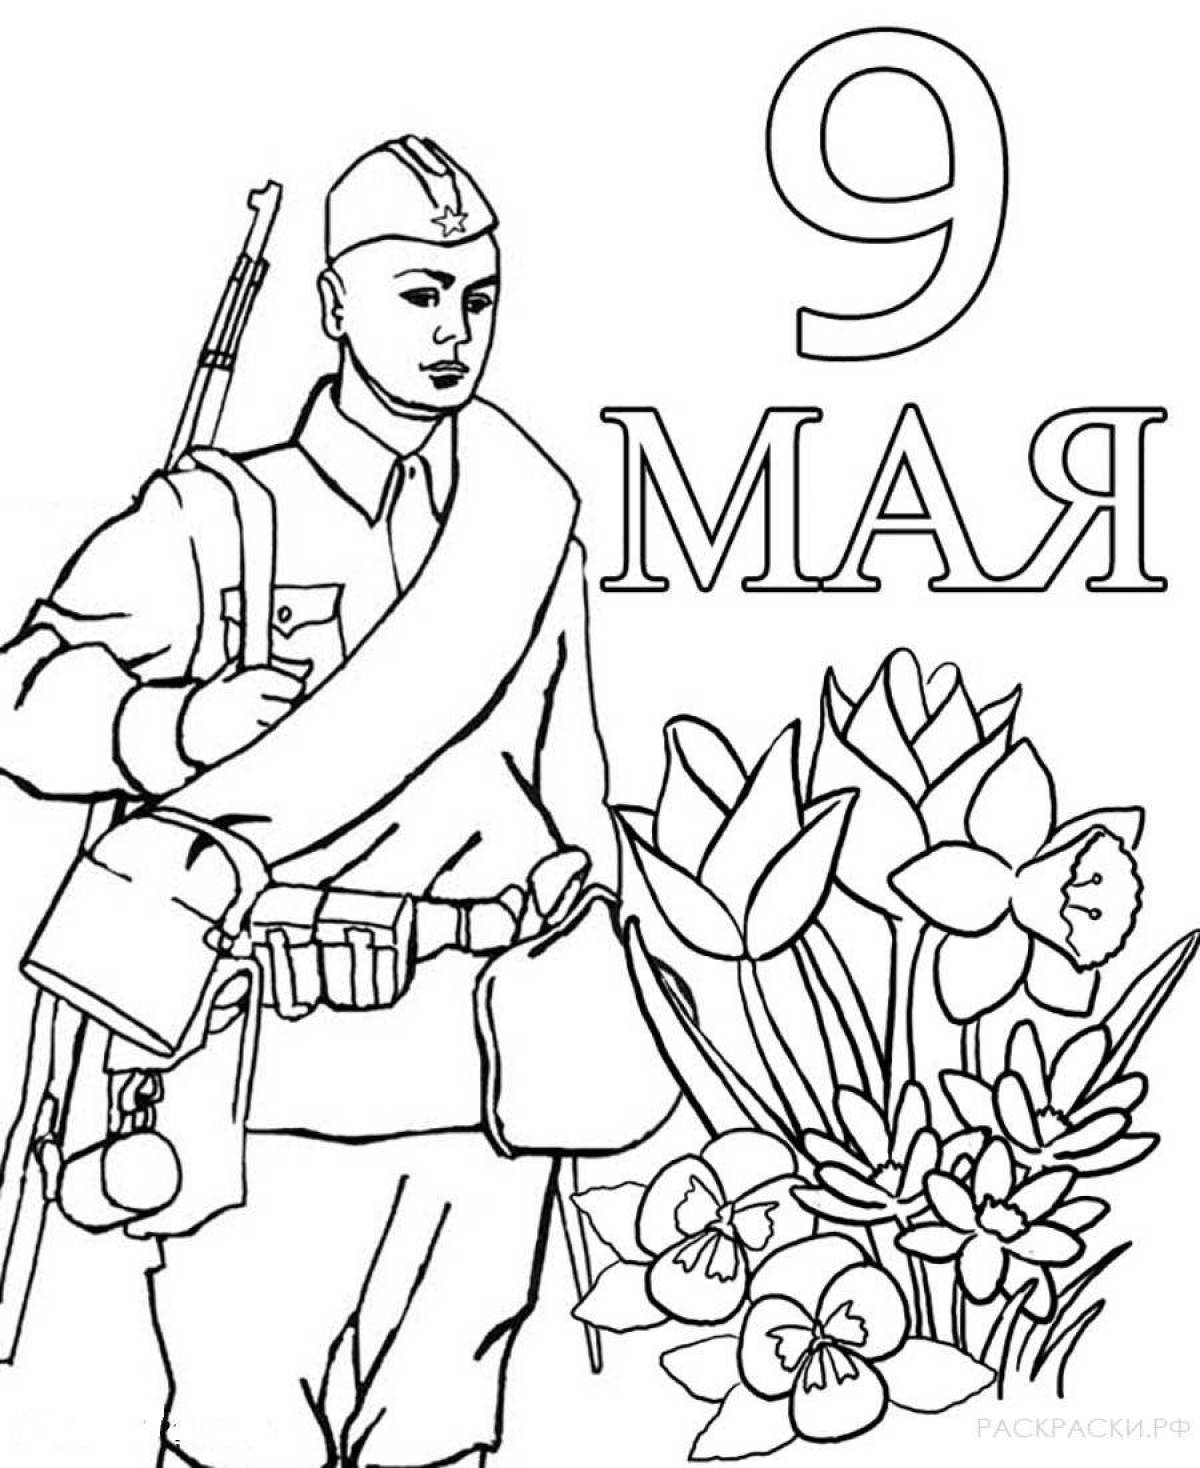 Great victory day coloring page